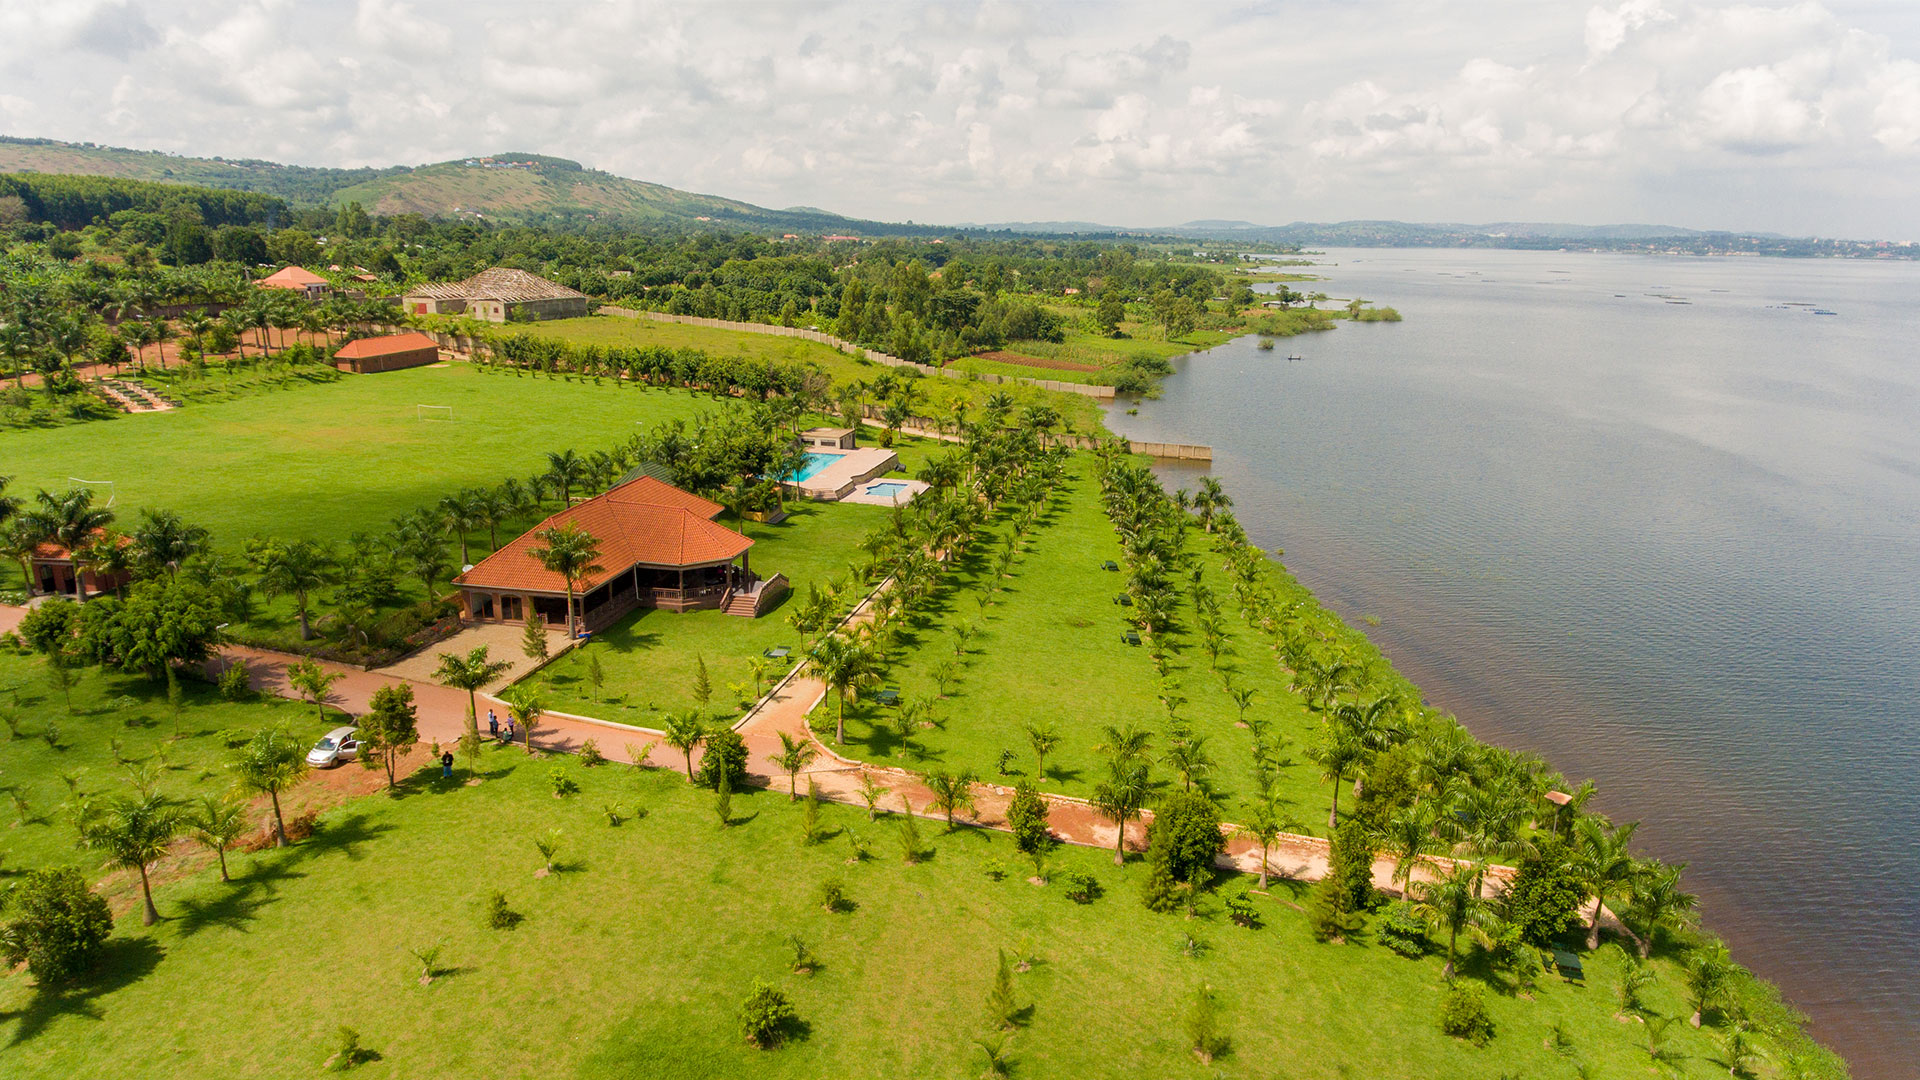 Hotels in Jinja, On Lake Victoria Shores